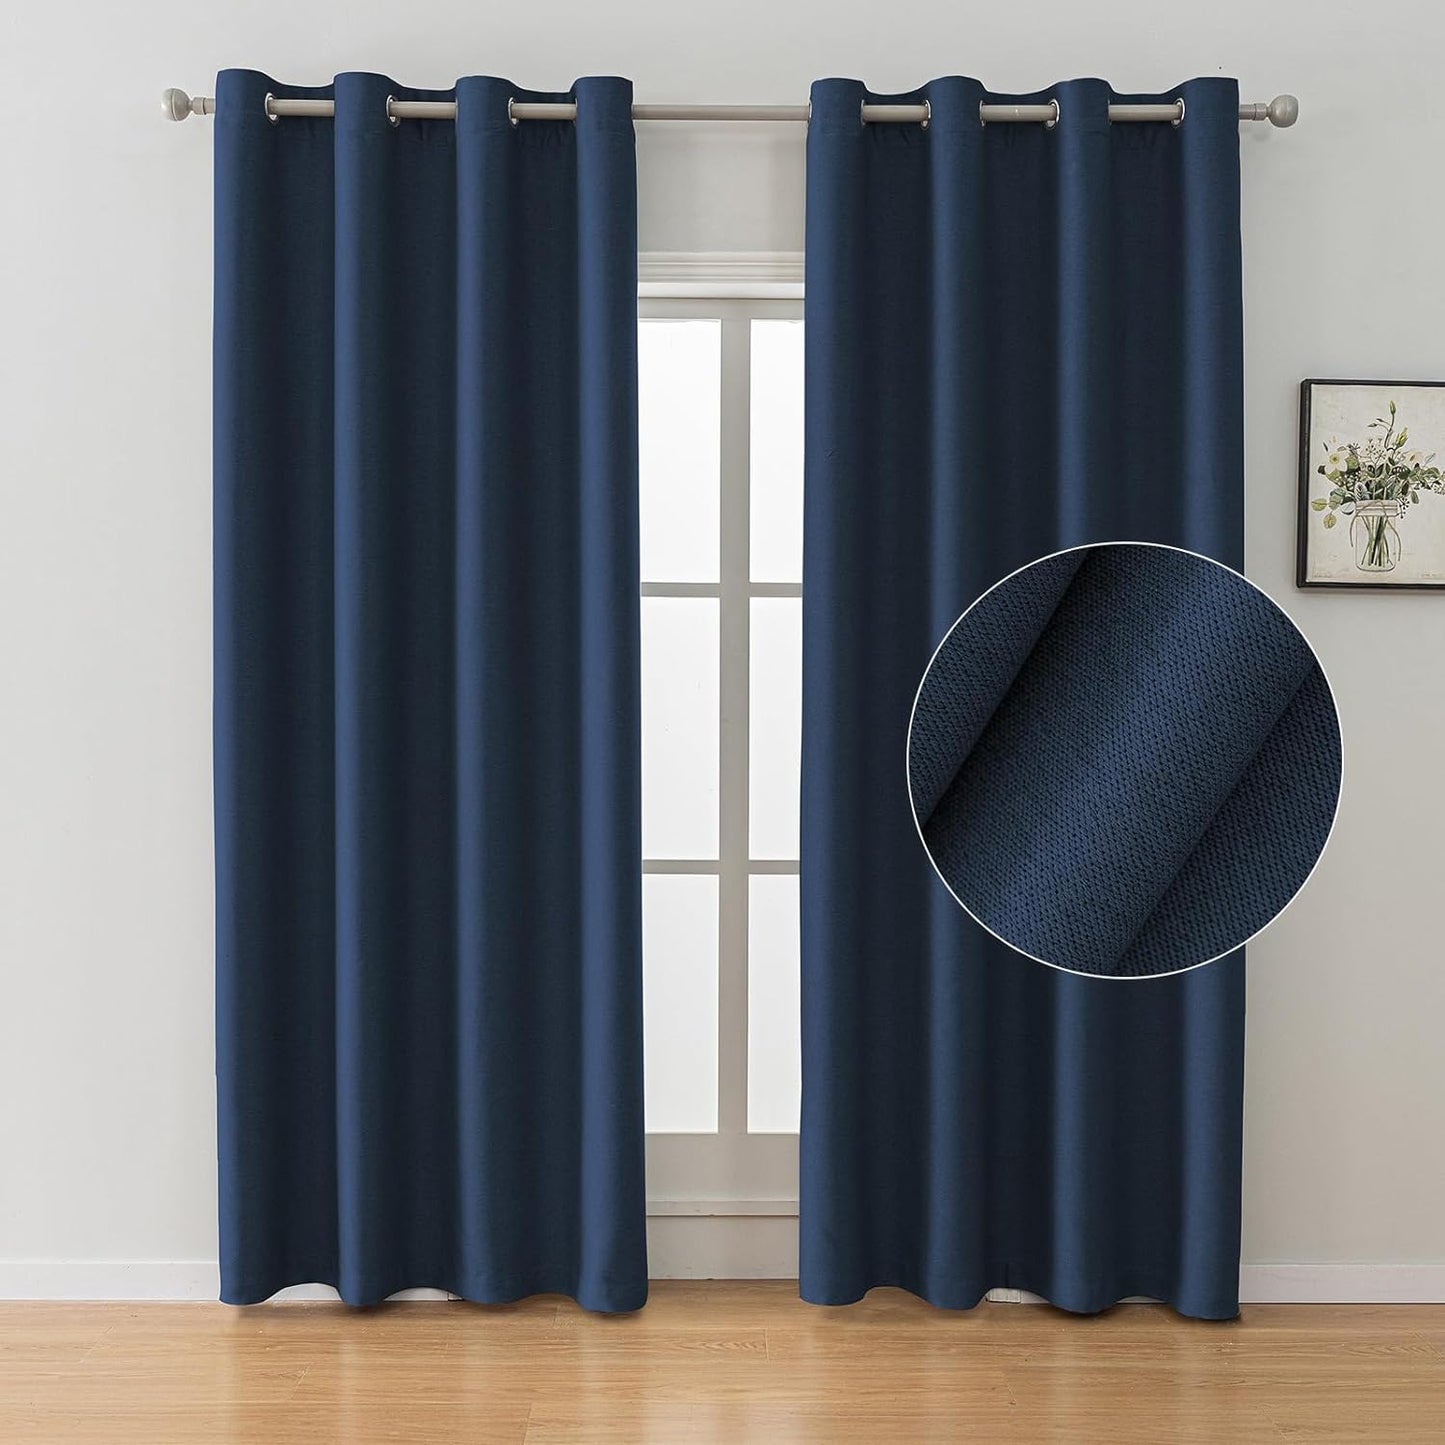 SYSLOON Natural Linen Curtains 72 Inch Length 2 Panels Set,Blackout Curtains for Bedroom Grommet,Thermal Insulated Room Darkening Curtains for Living Room,Long Drapes 42"X72",Beige  SYSLOON Blue 52X96In （W X L） 